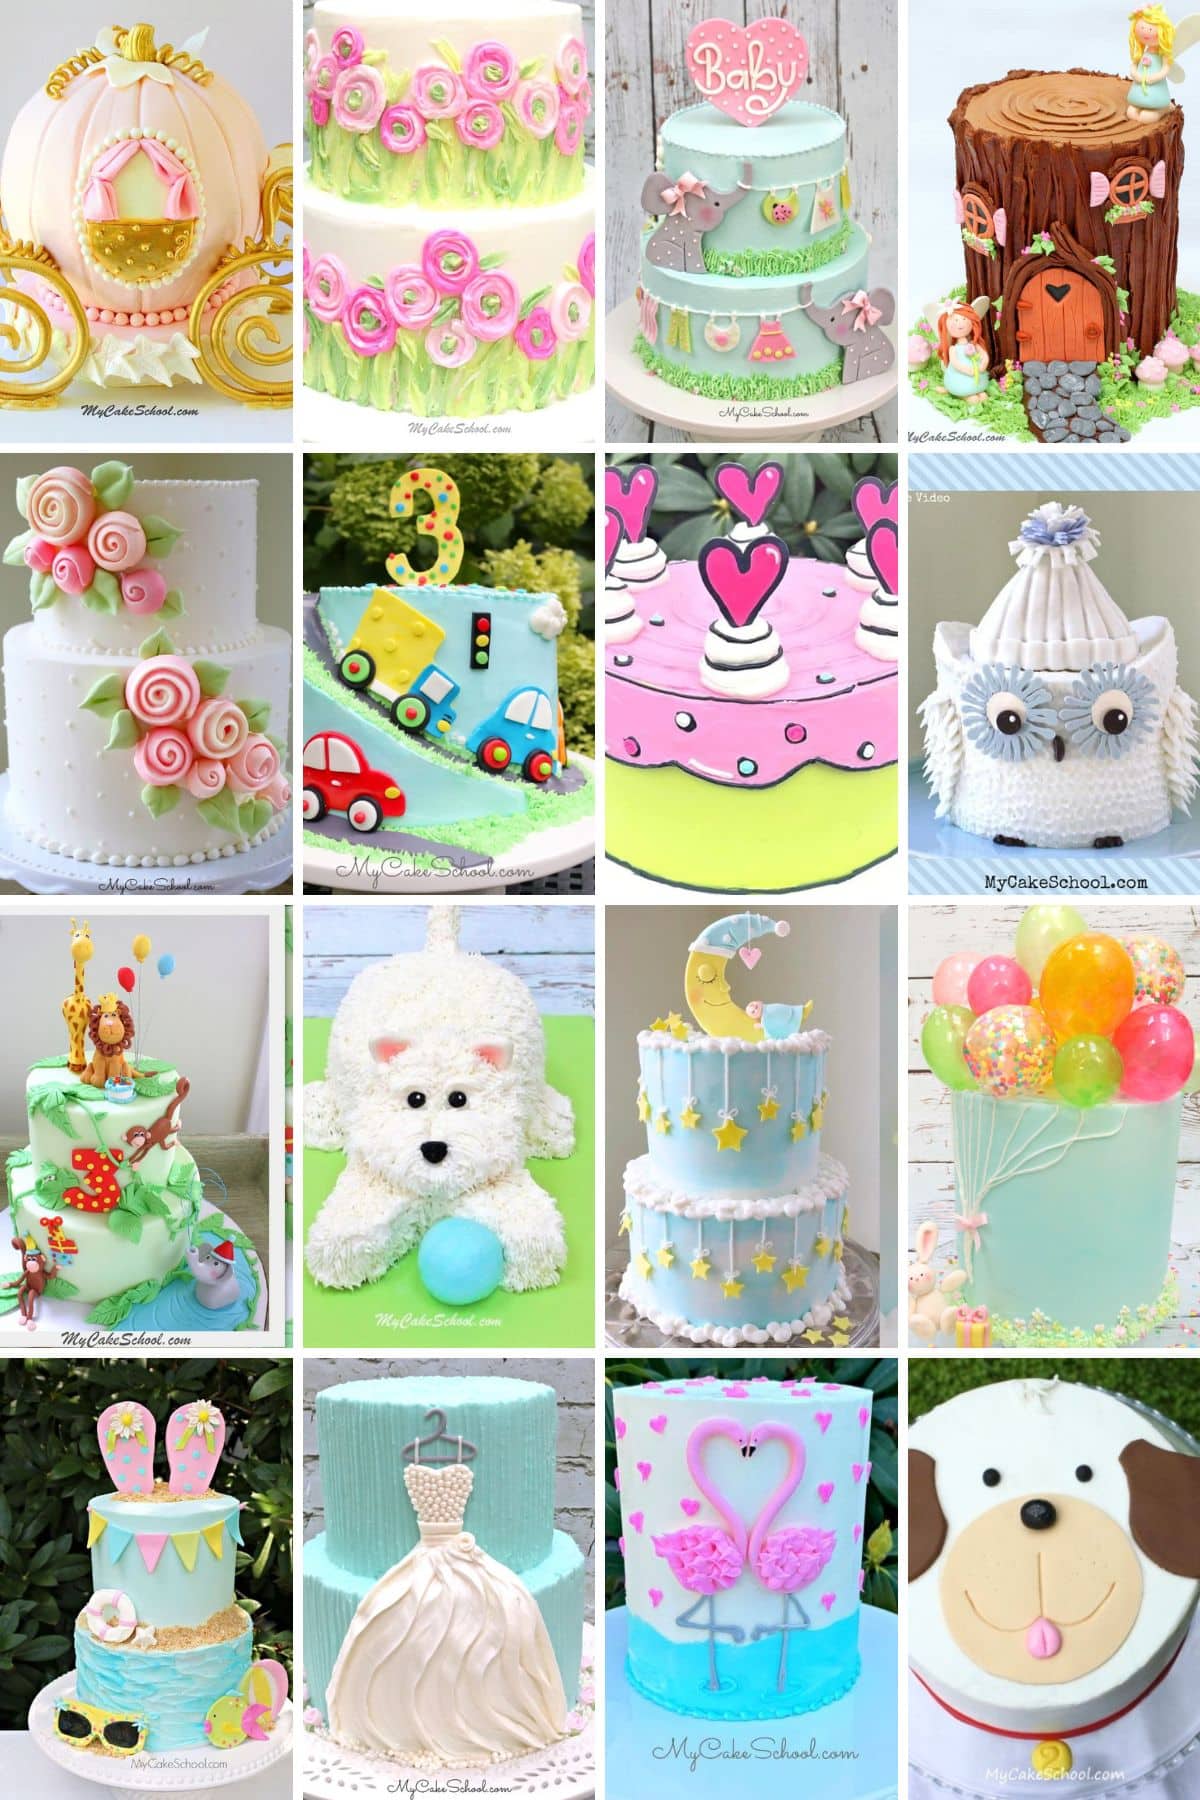 Collage of cute cake designs from our site.